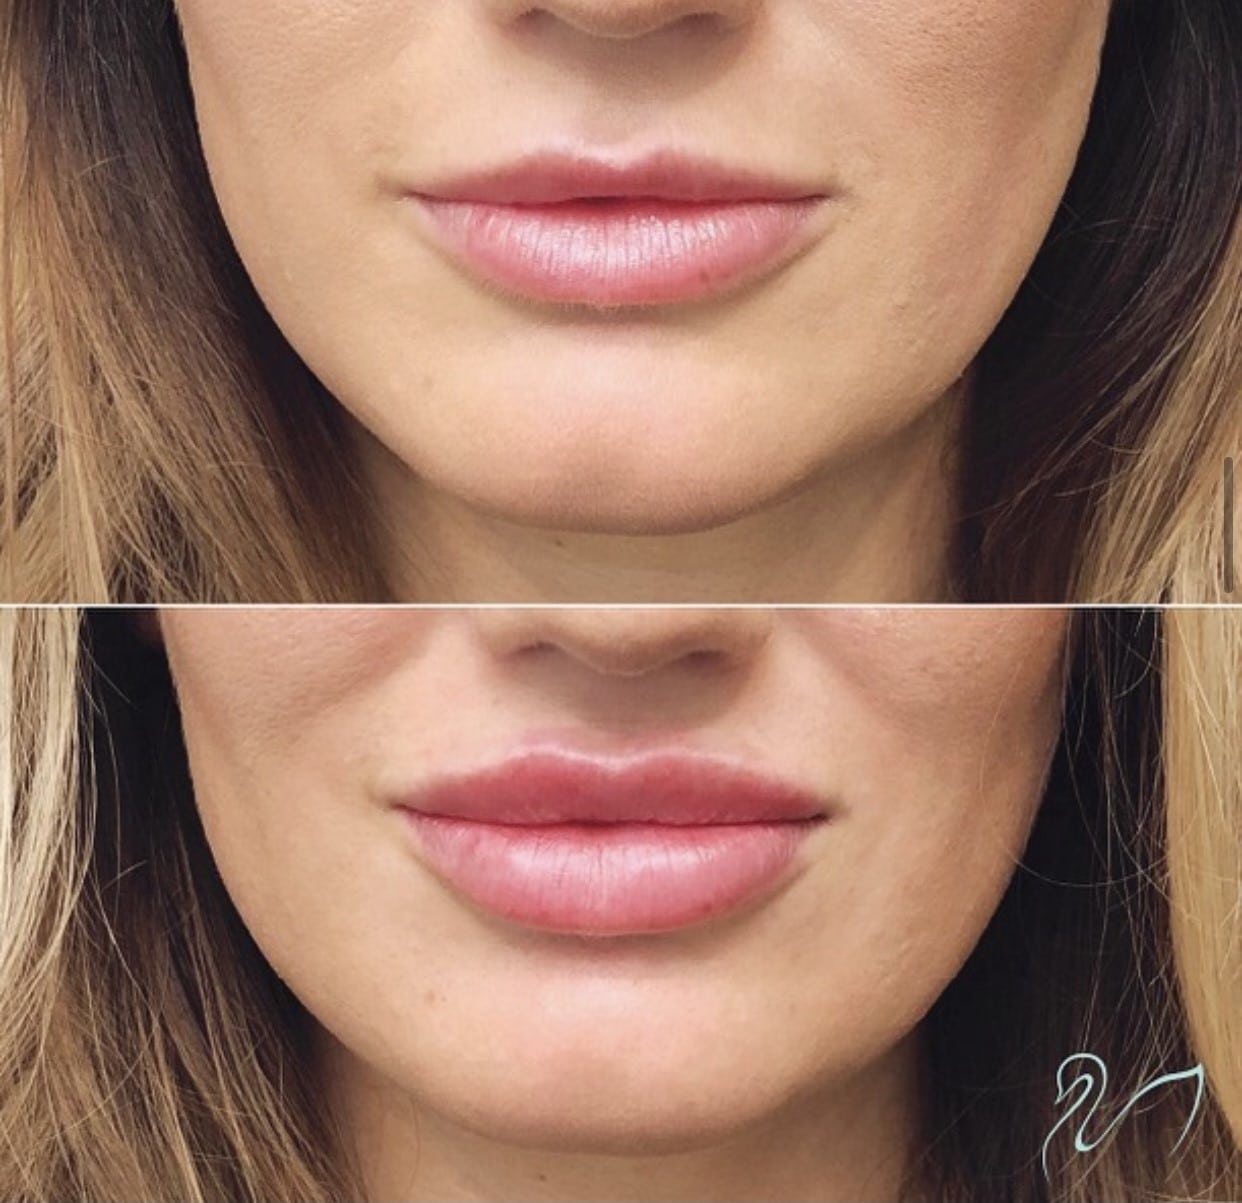 Lips using 1 syringe of Juvéderm Ultra. LOVE these results